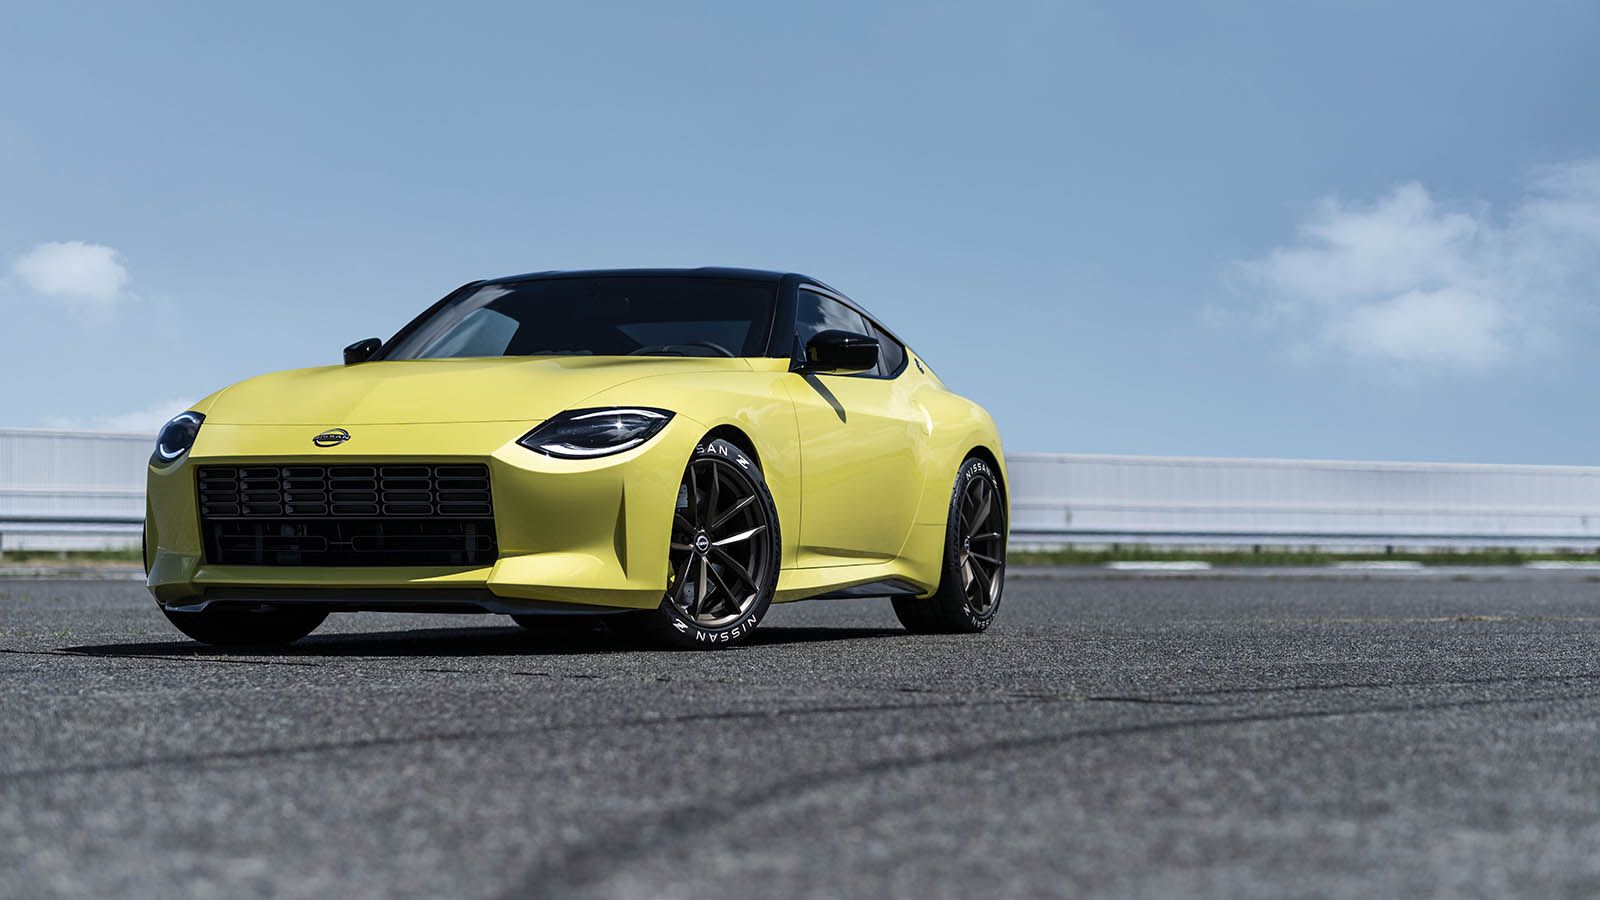 The Nissan 400z Will Debut This August